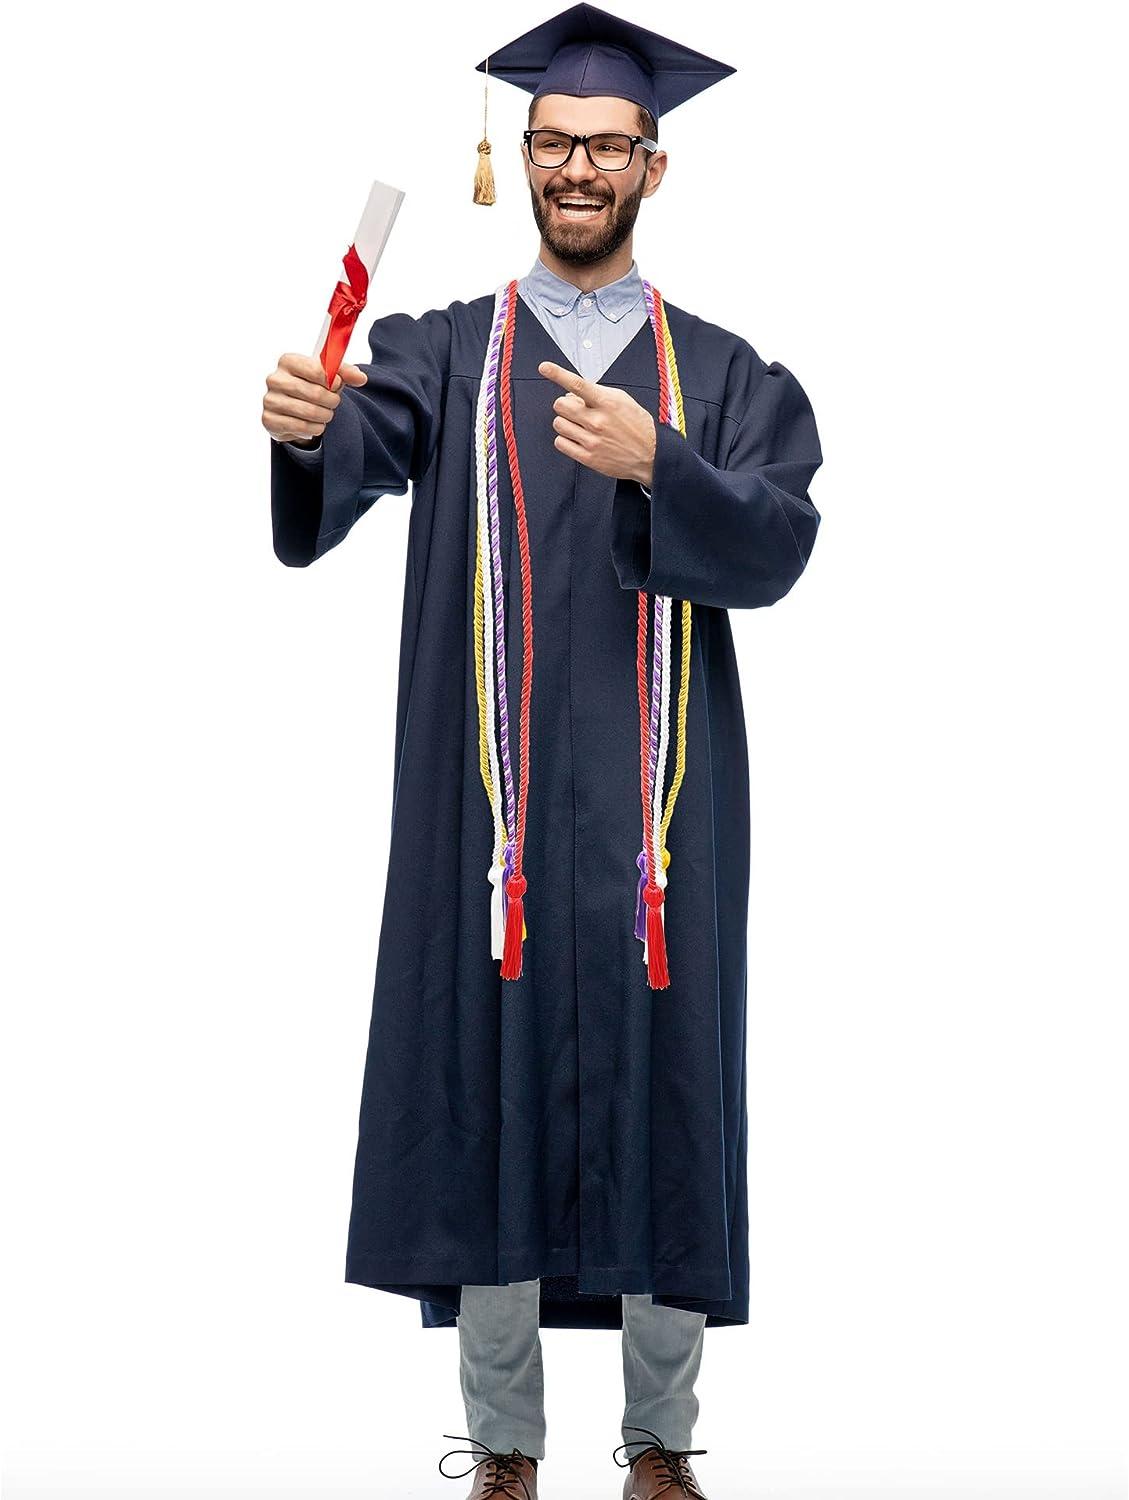 Our school displays our grades through the graduation robes we wear. White  robe = 4.00+ GPA, blue robe for others. Is this allowed by law? I just feel  this is not right